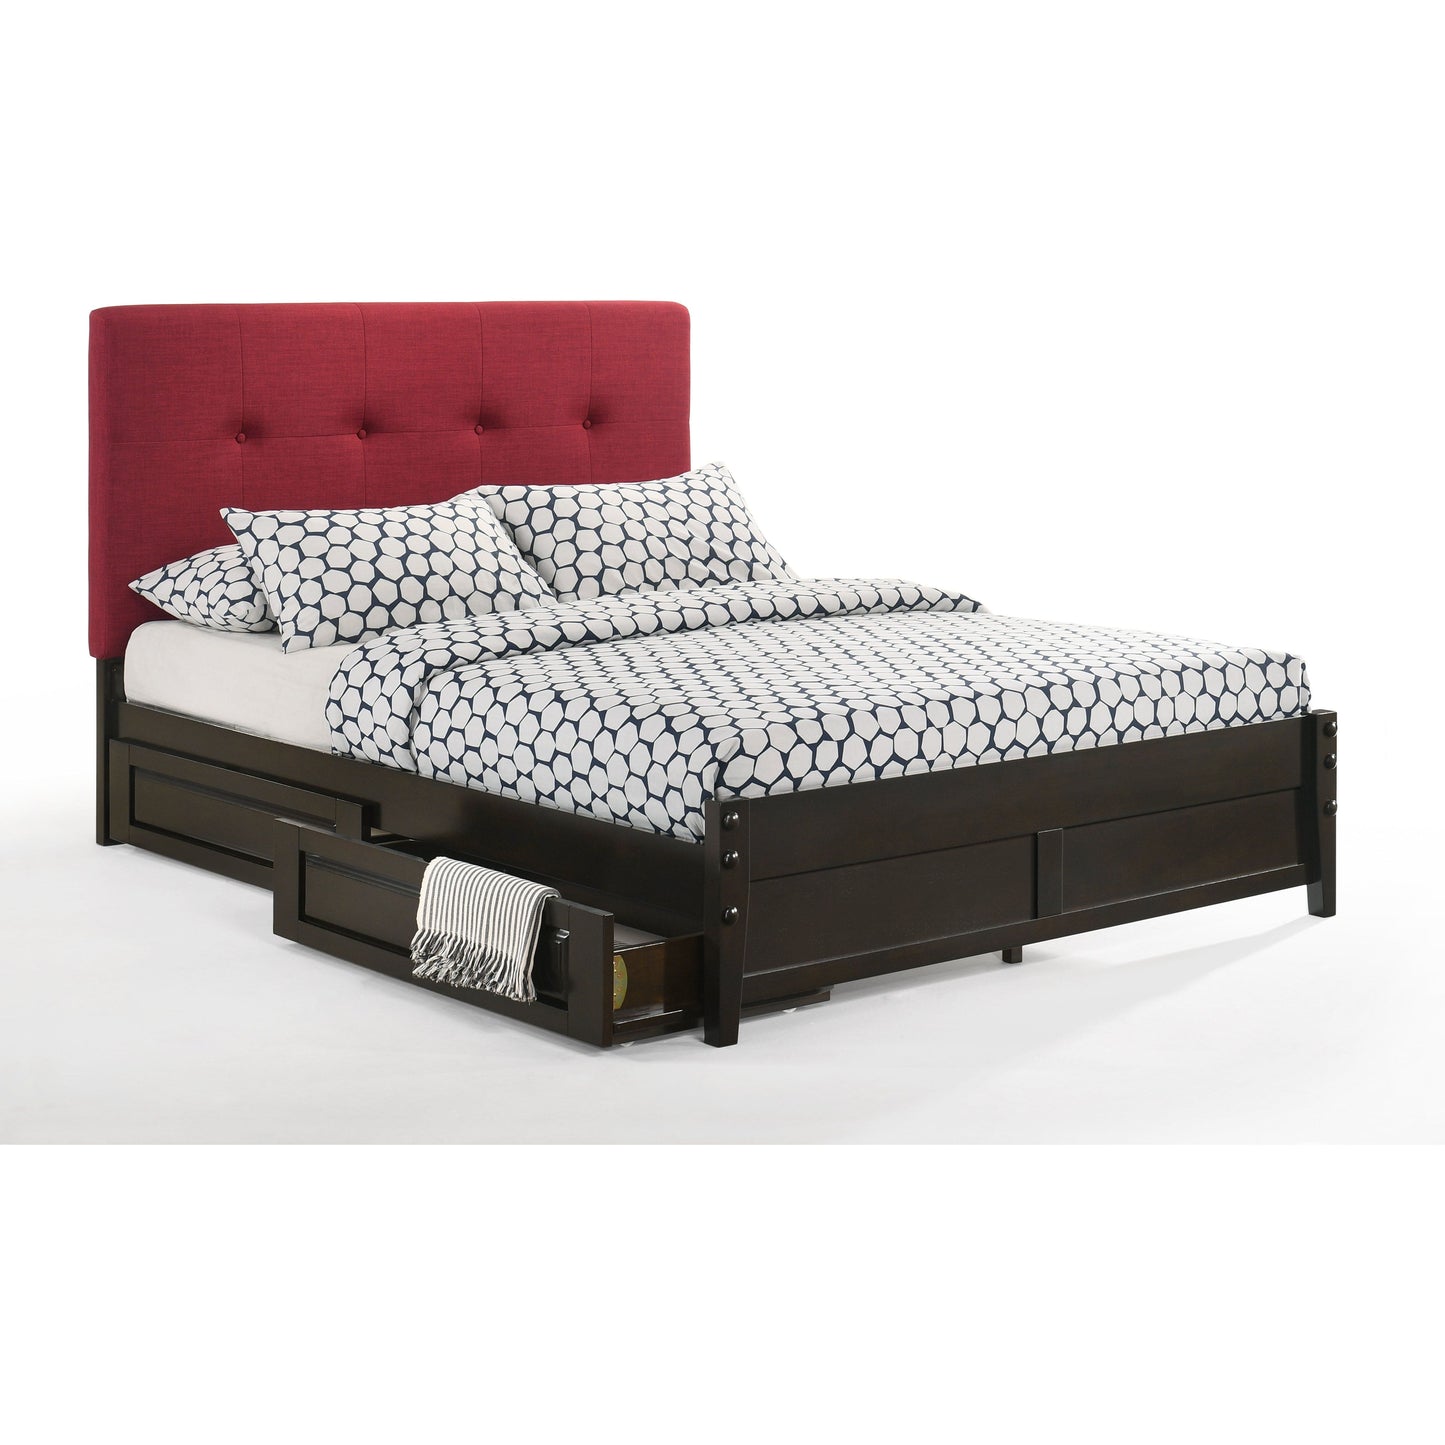 Night and Day Paprika Full Bed in Charcoal with Chocolate Finish Frame (K Series)